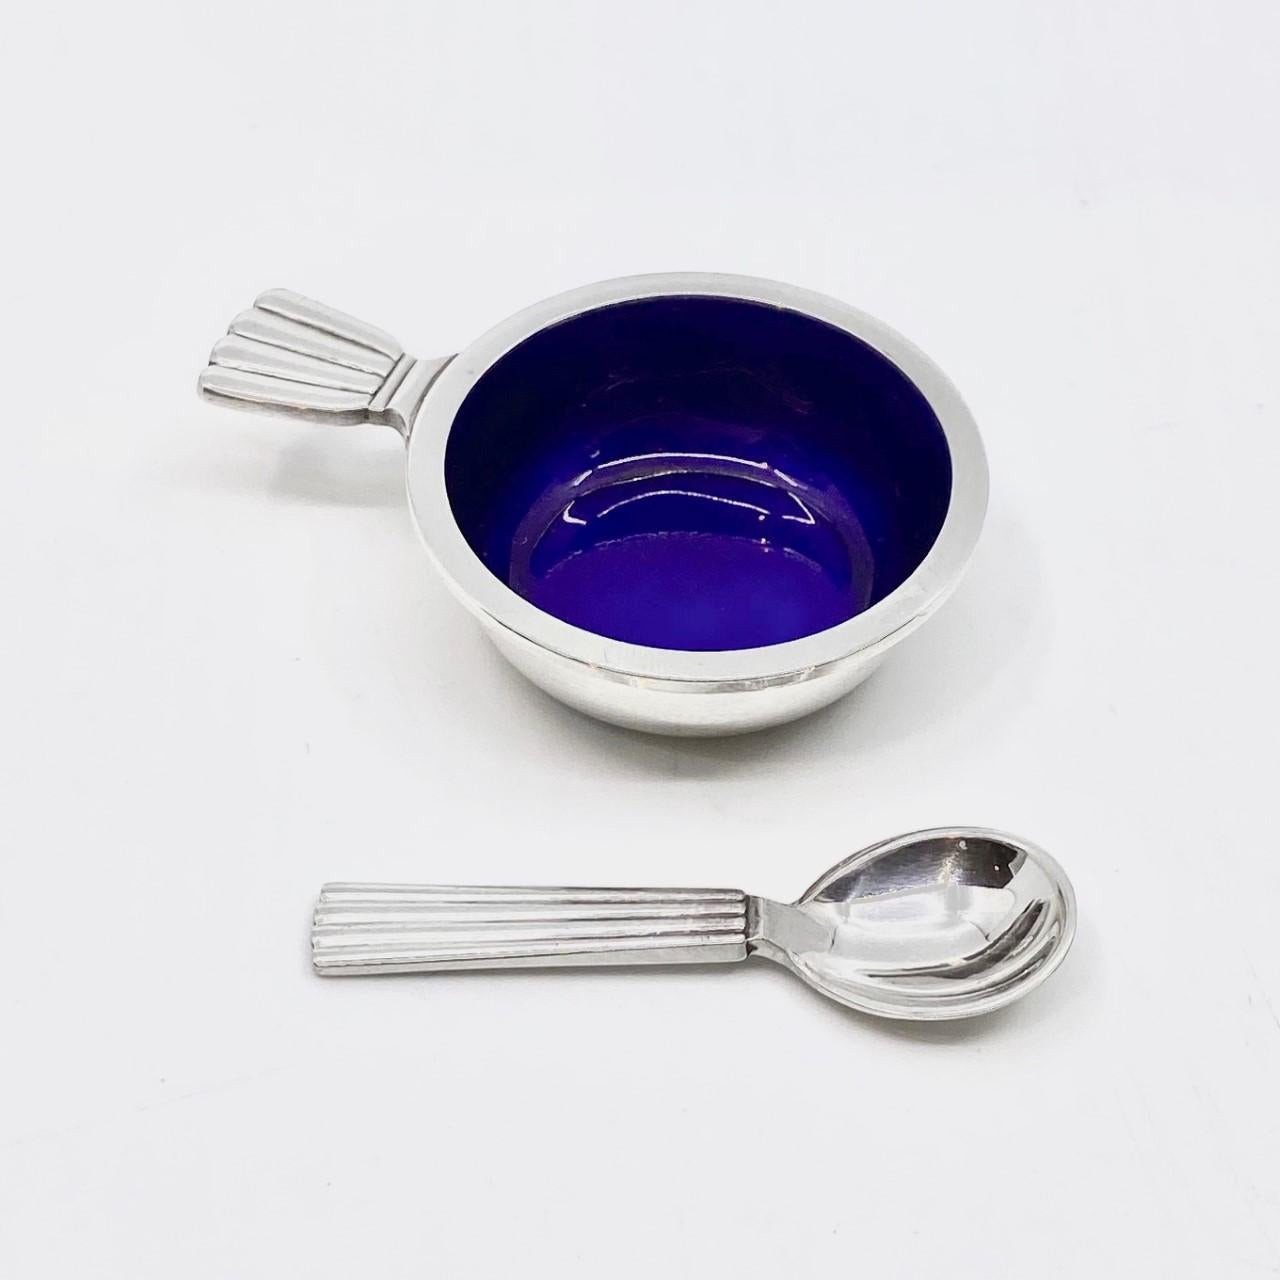 Georg Jensen sterling silver salt cellar with blue enamel and salt spoon, items #102 & #103 in the Bernadotte pattern, design #9 by Sigvard Bernadotte from 1939.

Additional information:
Material: Sterling silver
Styles: Art Deco
Hallmarks: With